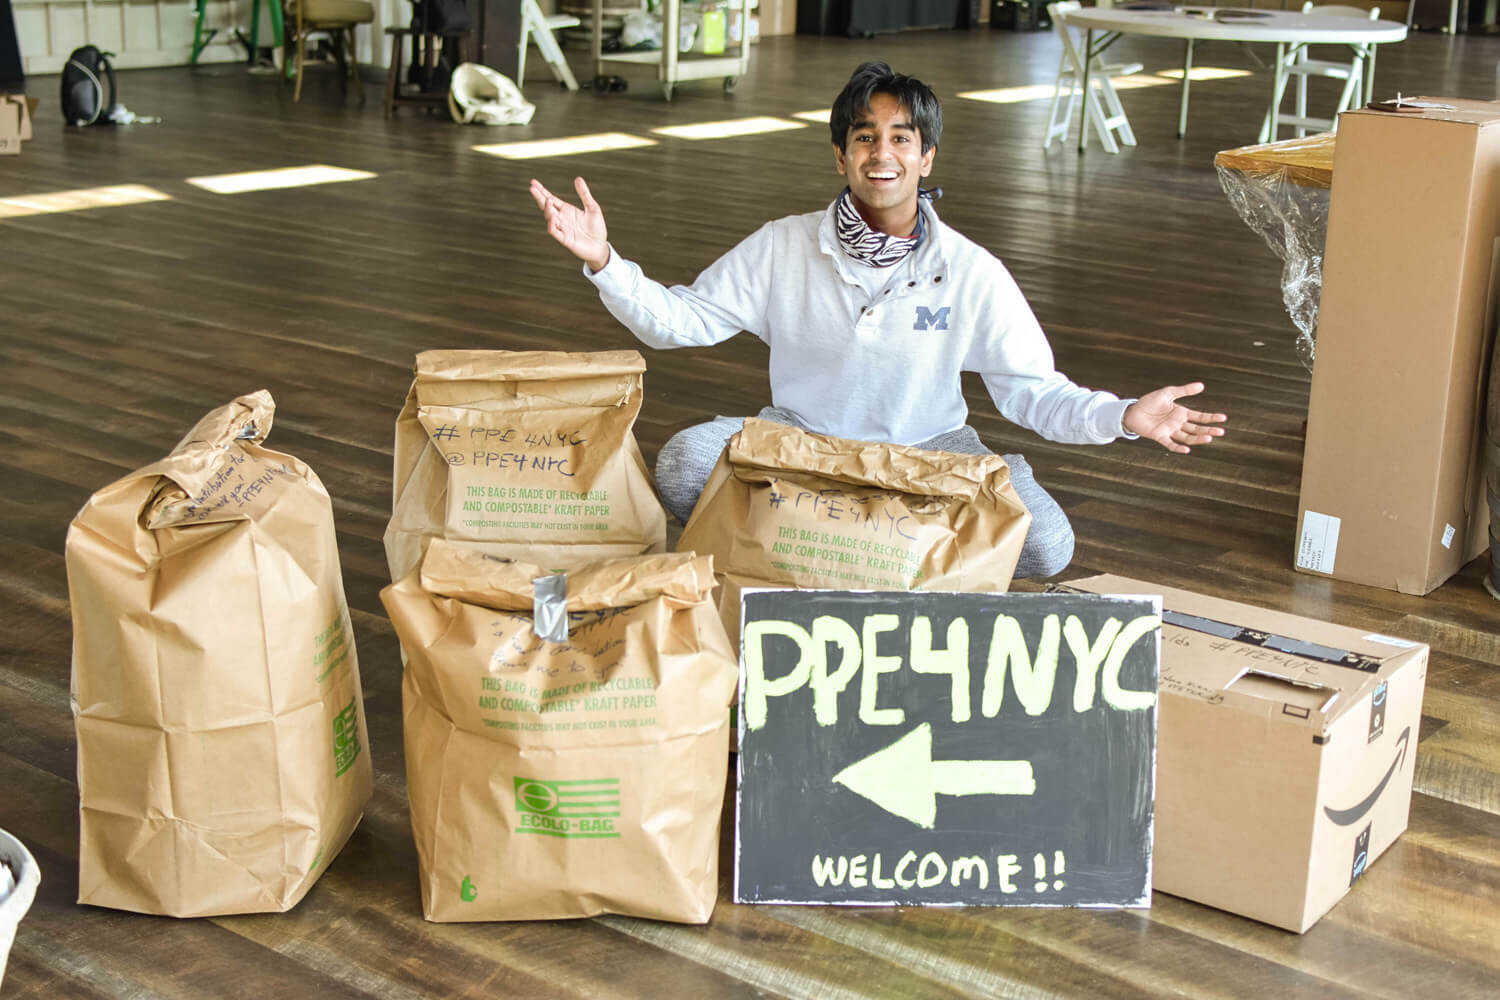 Our founder and CEO Krishna with bags of PPE